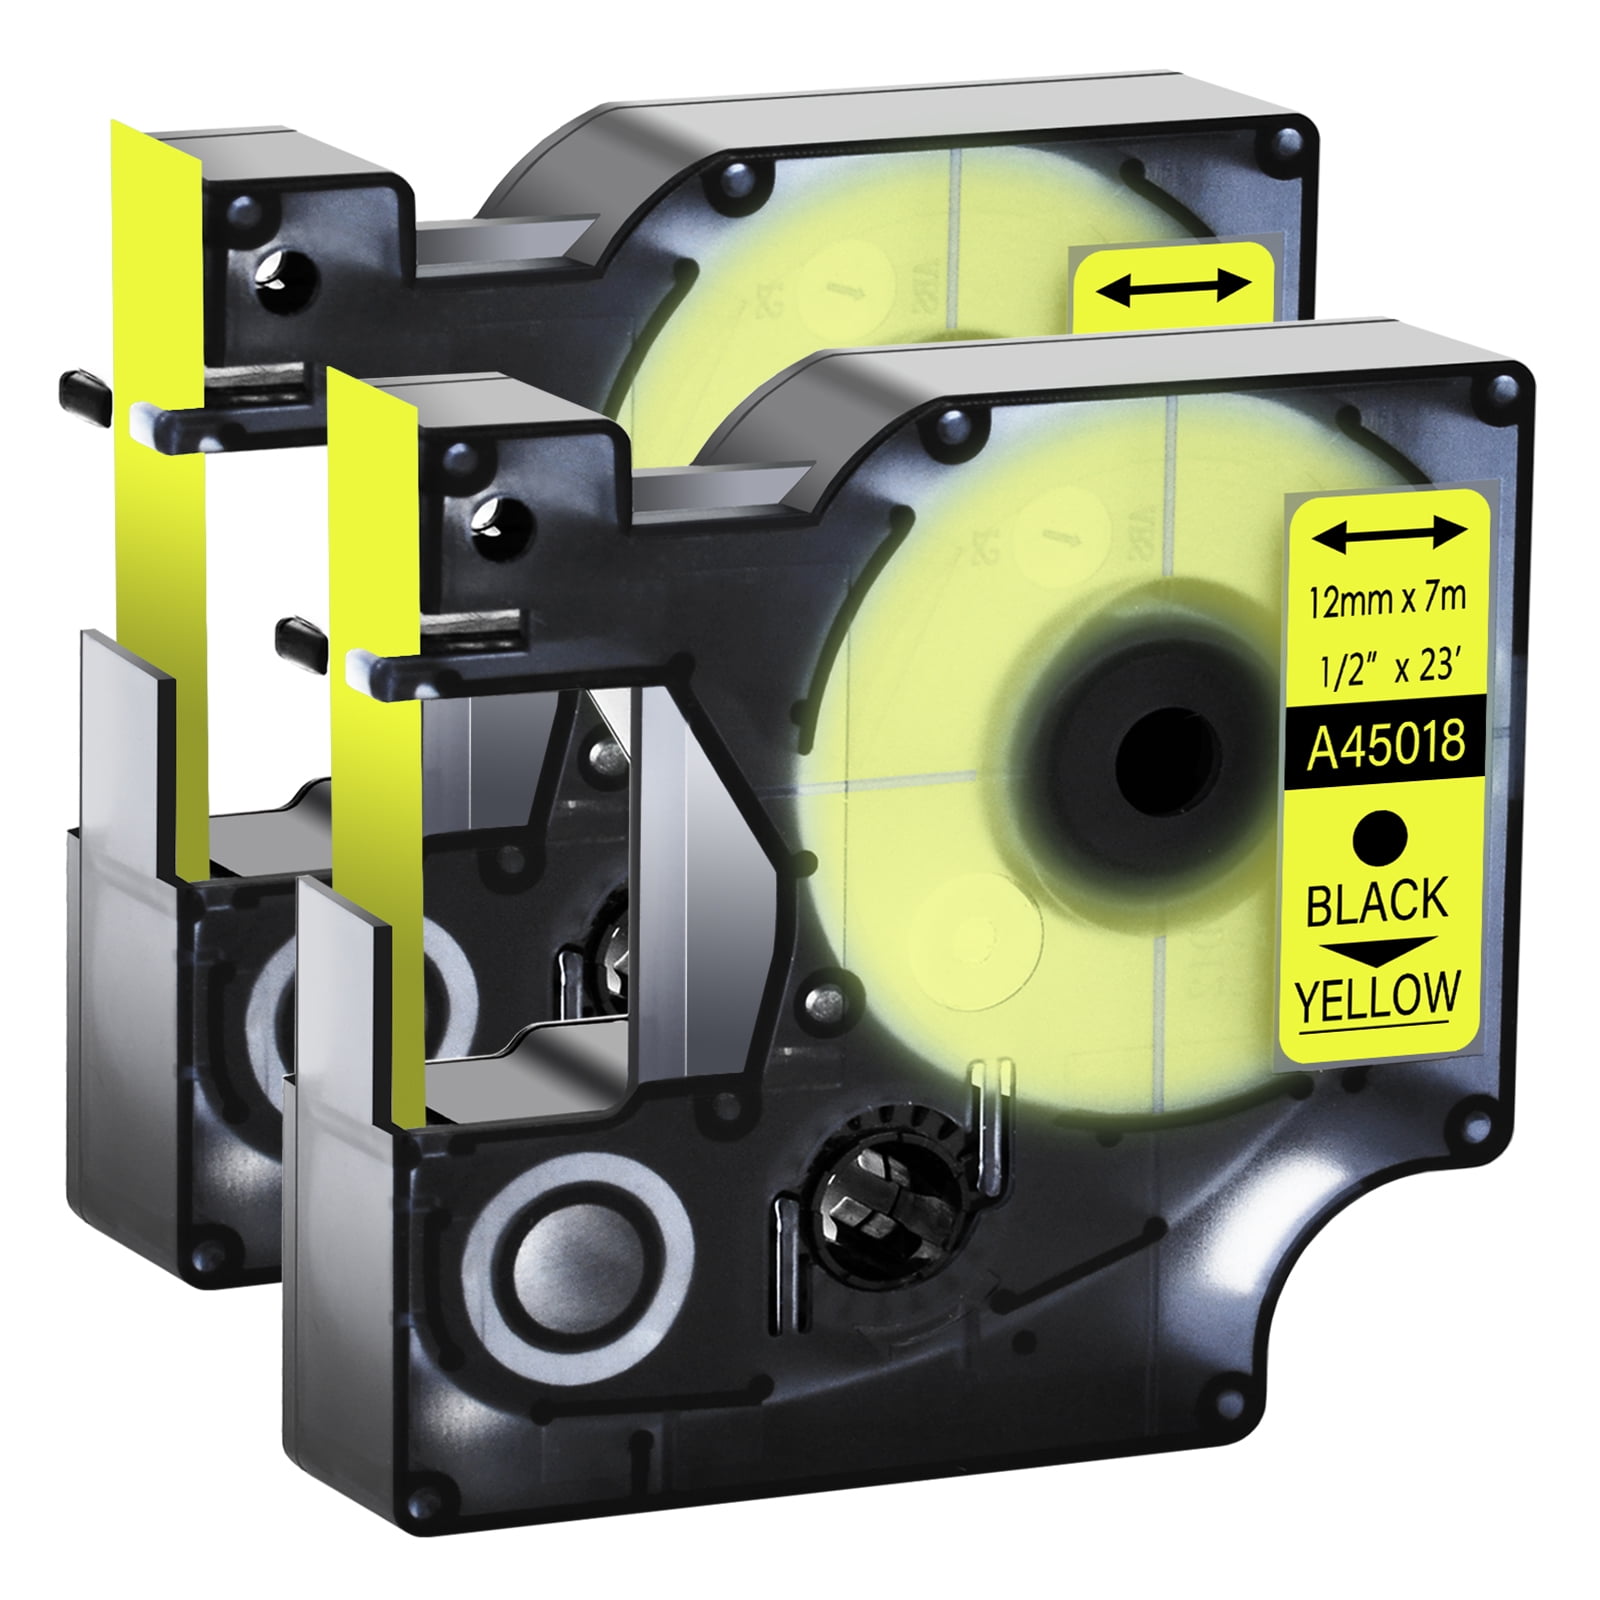 Black on Yellow Label Tape Compatible For Dymo D1 45018 LabelManager 150 160 200 